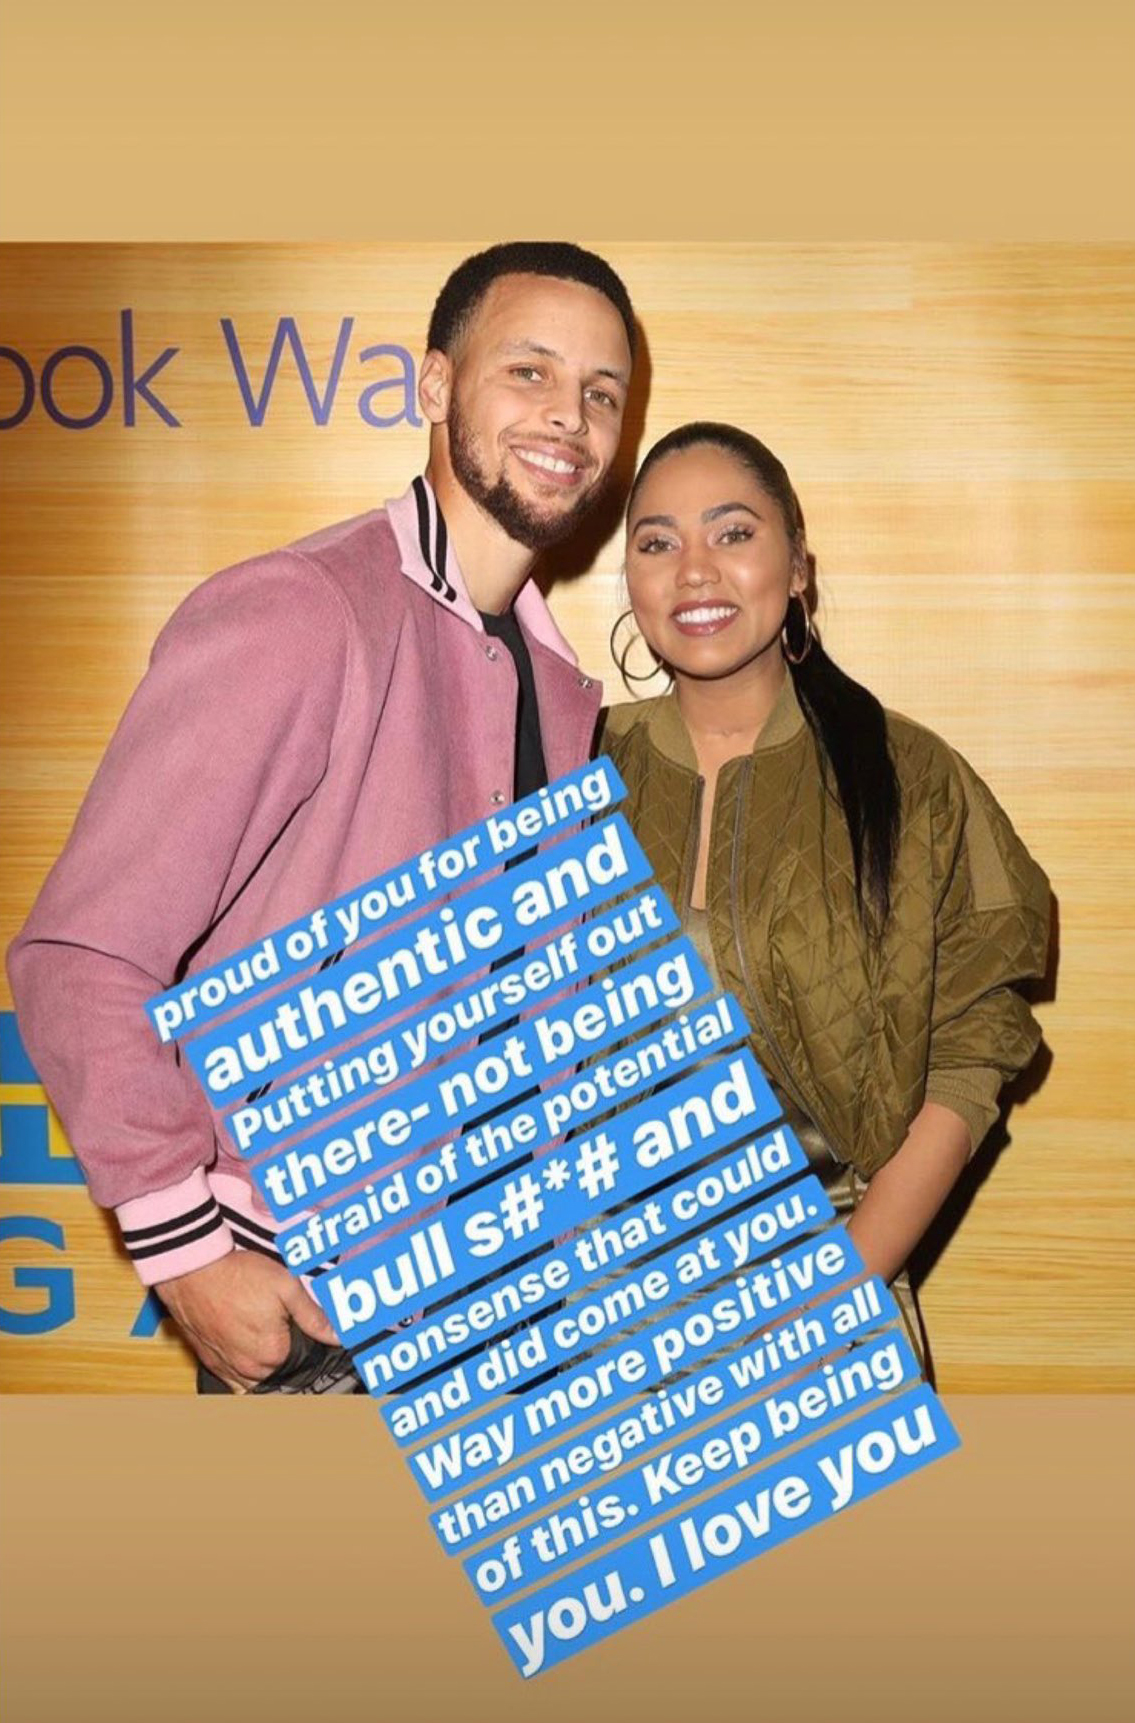 Stephen Curry and wife Ayesha oppose multi-family housing development by  their house, claiming safety fears